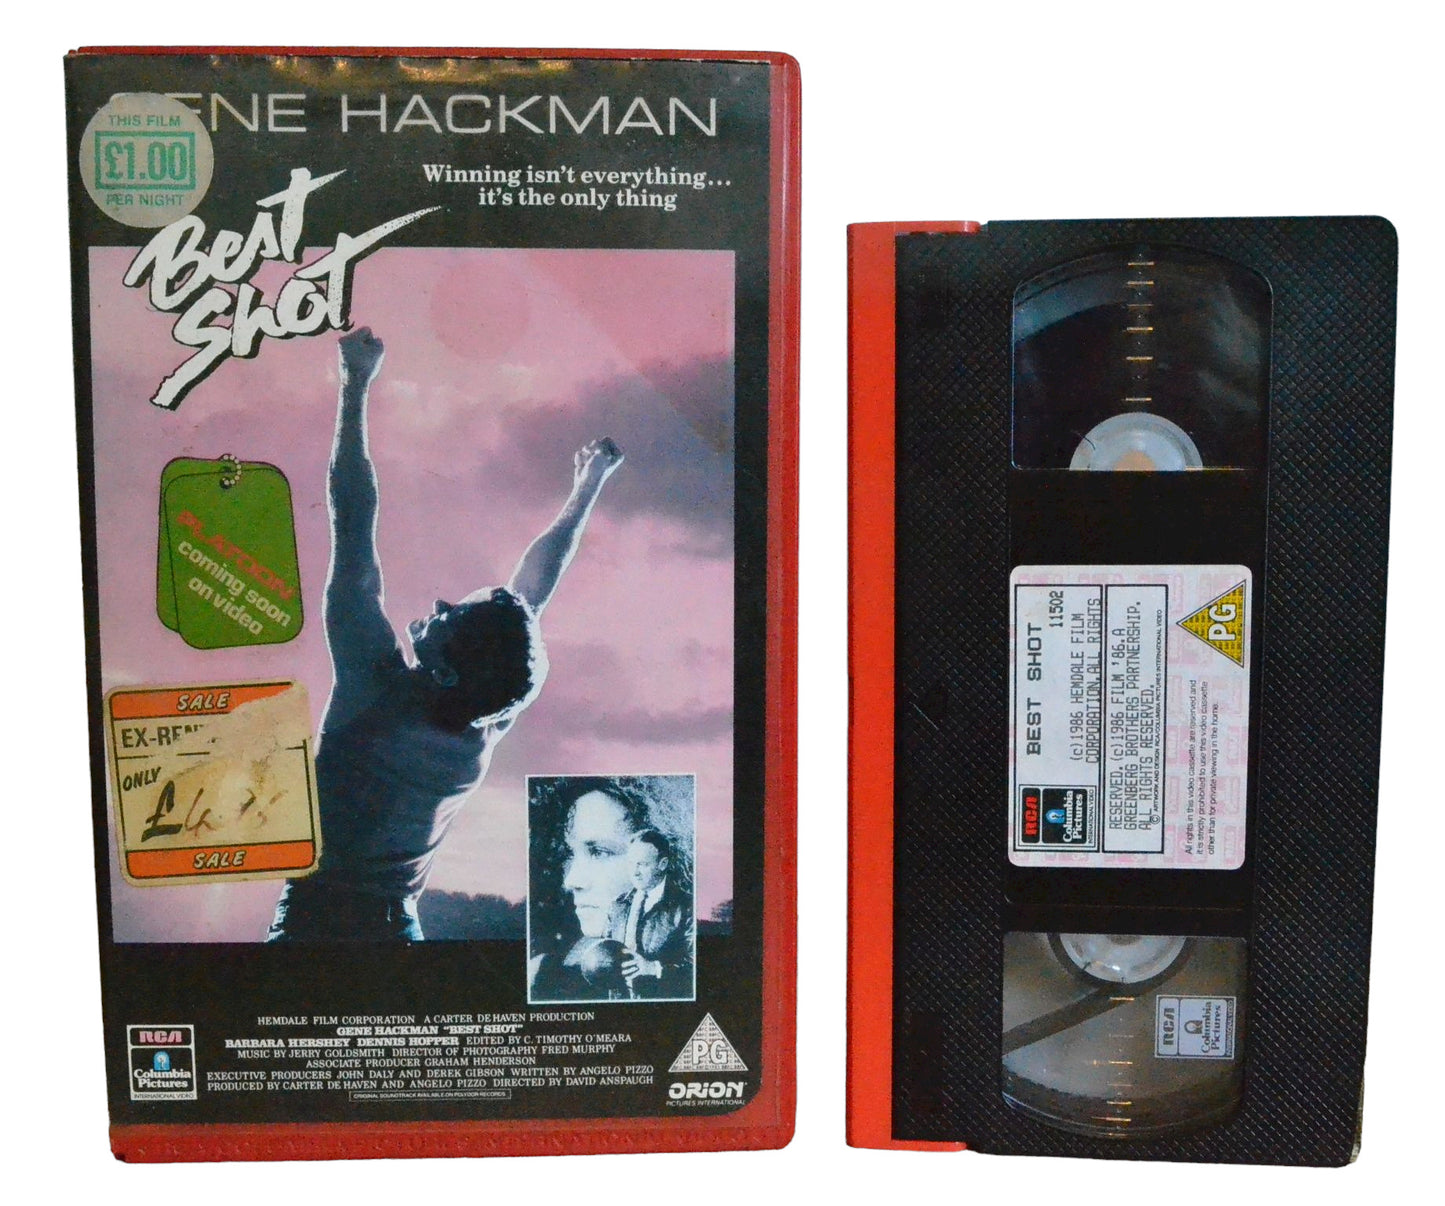 Best Shot (Winning Isn't Everything It's The Only Thing ) - Gene Hackman - Columbia Pictures International Video - Drama - Large Box - Pal VHS-